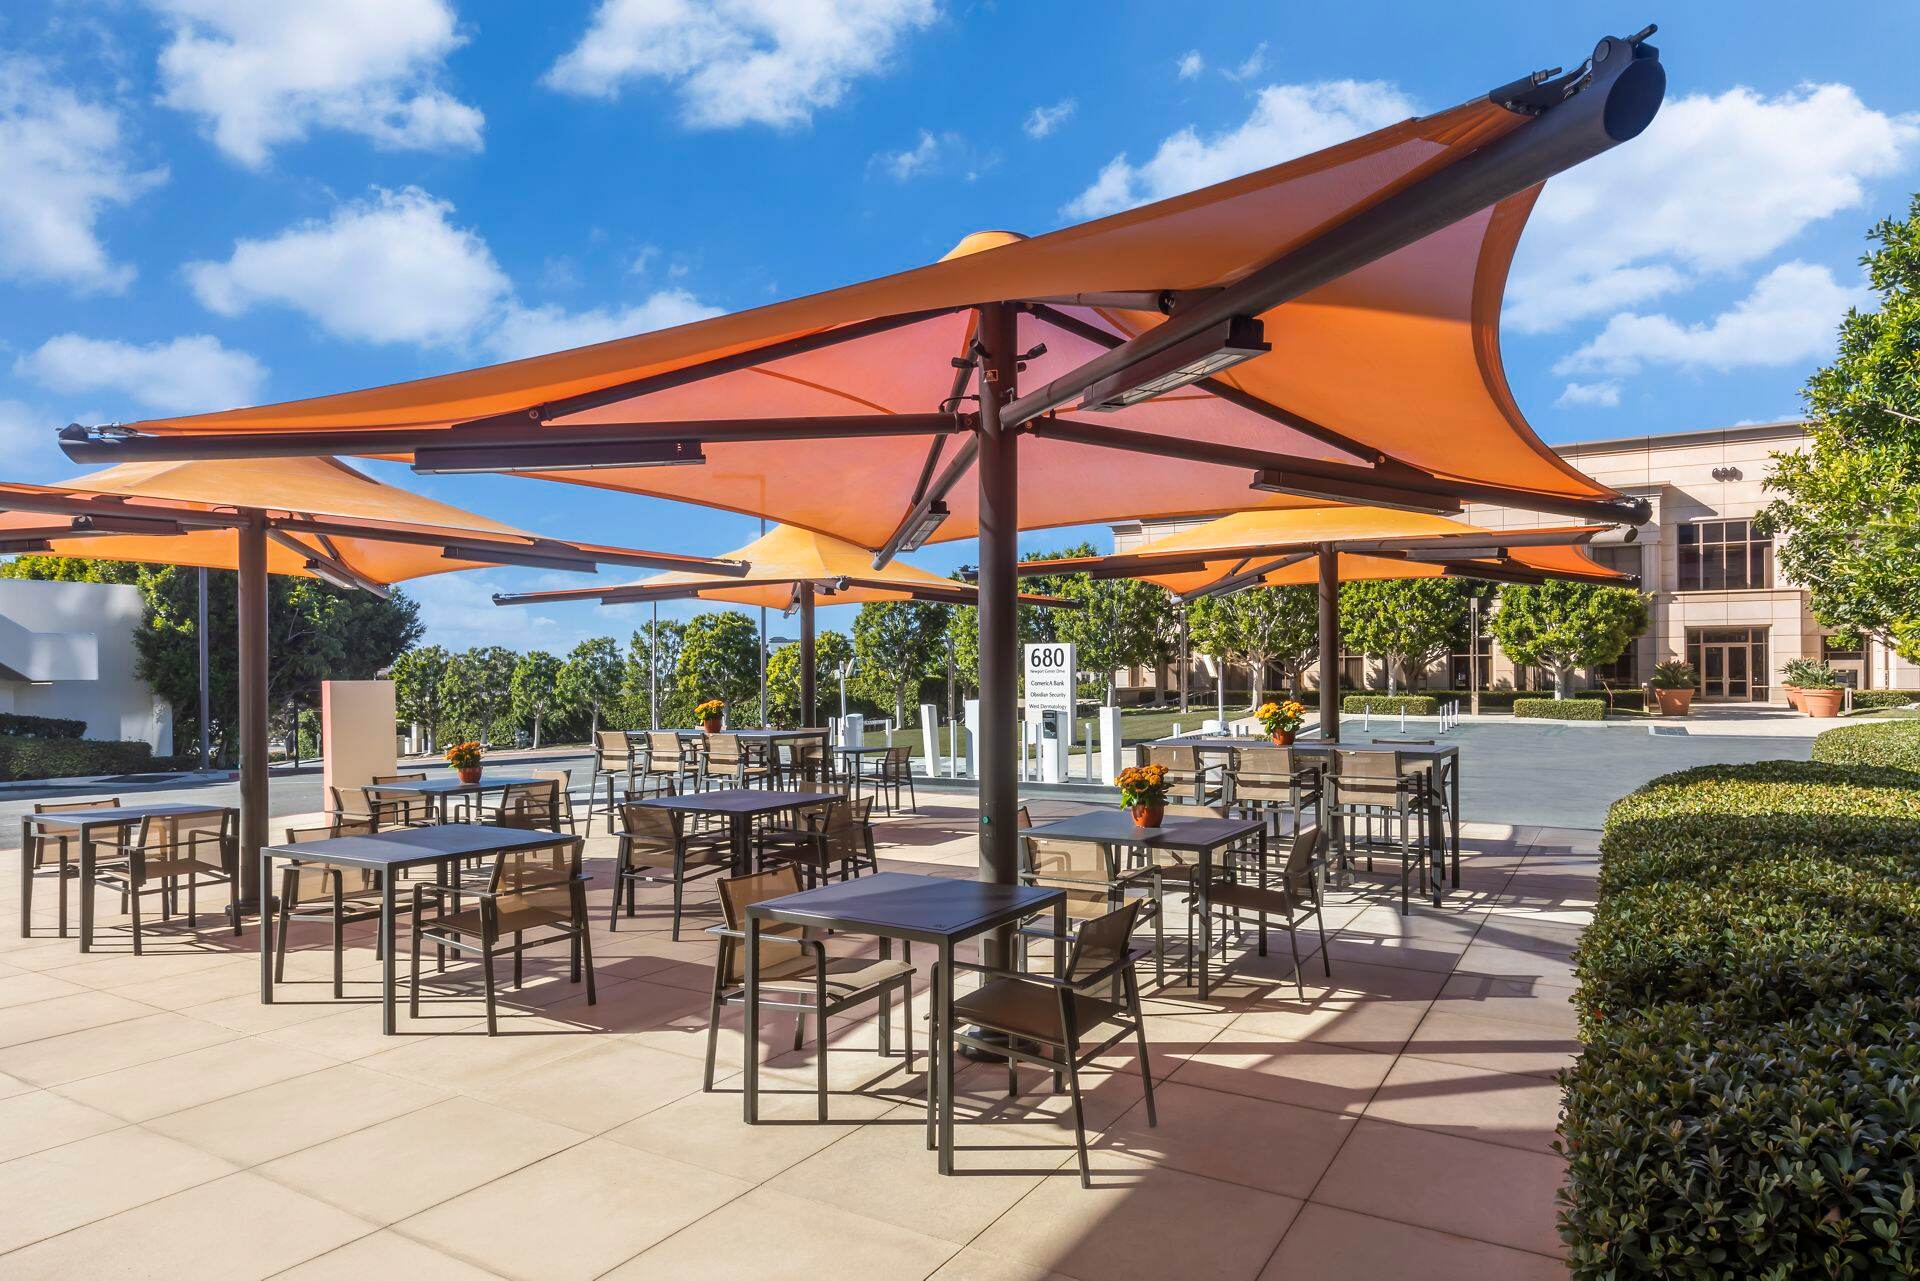 Exterior view of the outdoor workspace area at 680 Newport Center Drive in Newport Beach, CA.